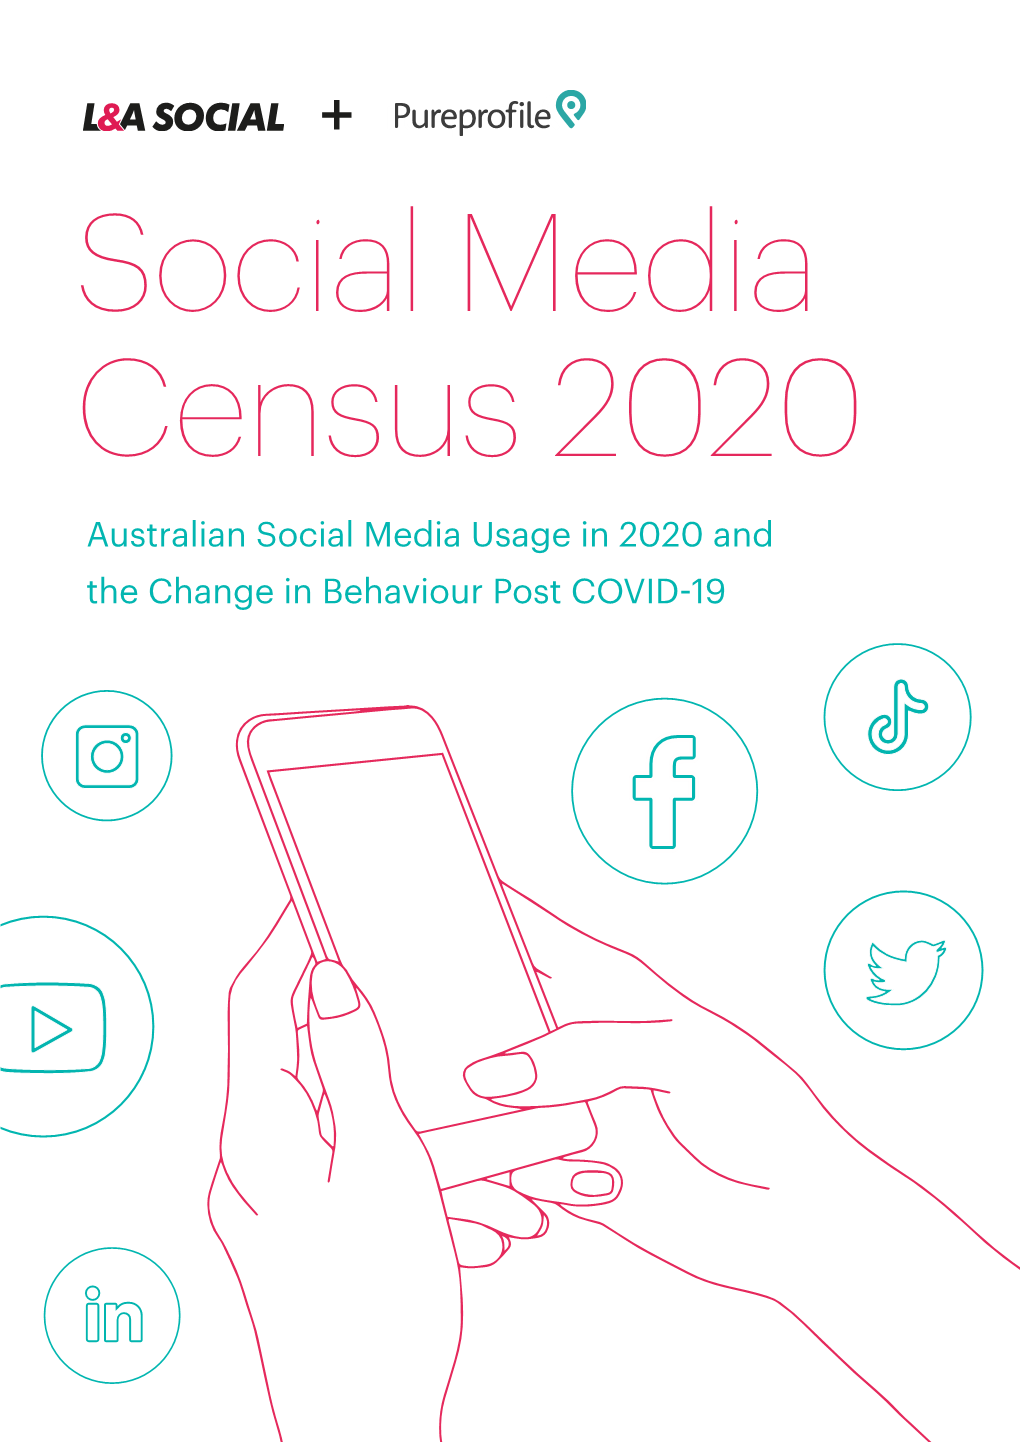 Australian Social Media Usage in 2020 and the Change in Behaviour Post COVID-19 Hello and Welcome to Our F21 Social Media Census!